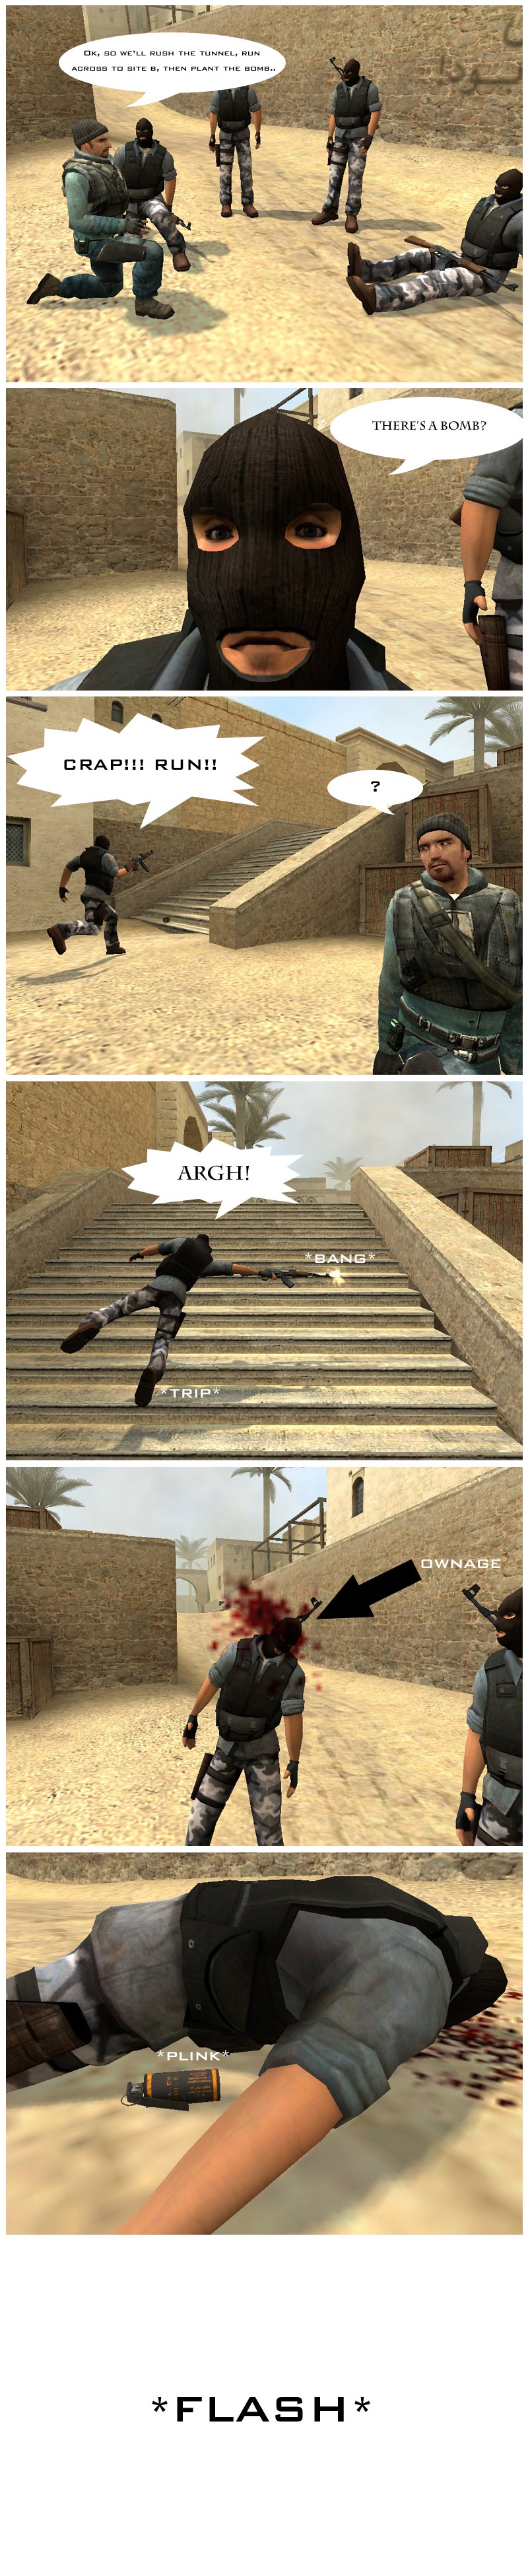 In Counter-Strike's Dust 2 map, Jeff is making a plan with the terrorist team. Jeff explains they will rush the tunnel, run across to Site B and then plant the bomb. One of the terrorists interrupts him in shock, screaming there's a bomb. The terrorists starts to flee in panic and trips over the stairs, accidentally firing his AK-47 rifle in the process. The shot goes straight into another terrorist's head, who falls to the ground. This terrorist's flash grenade hits the floor and bursts, flashing everyone.